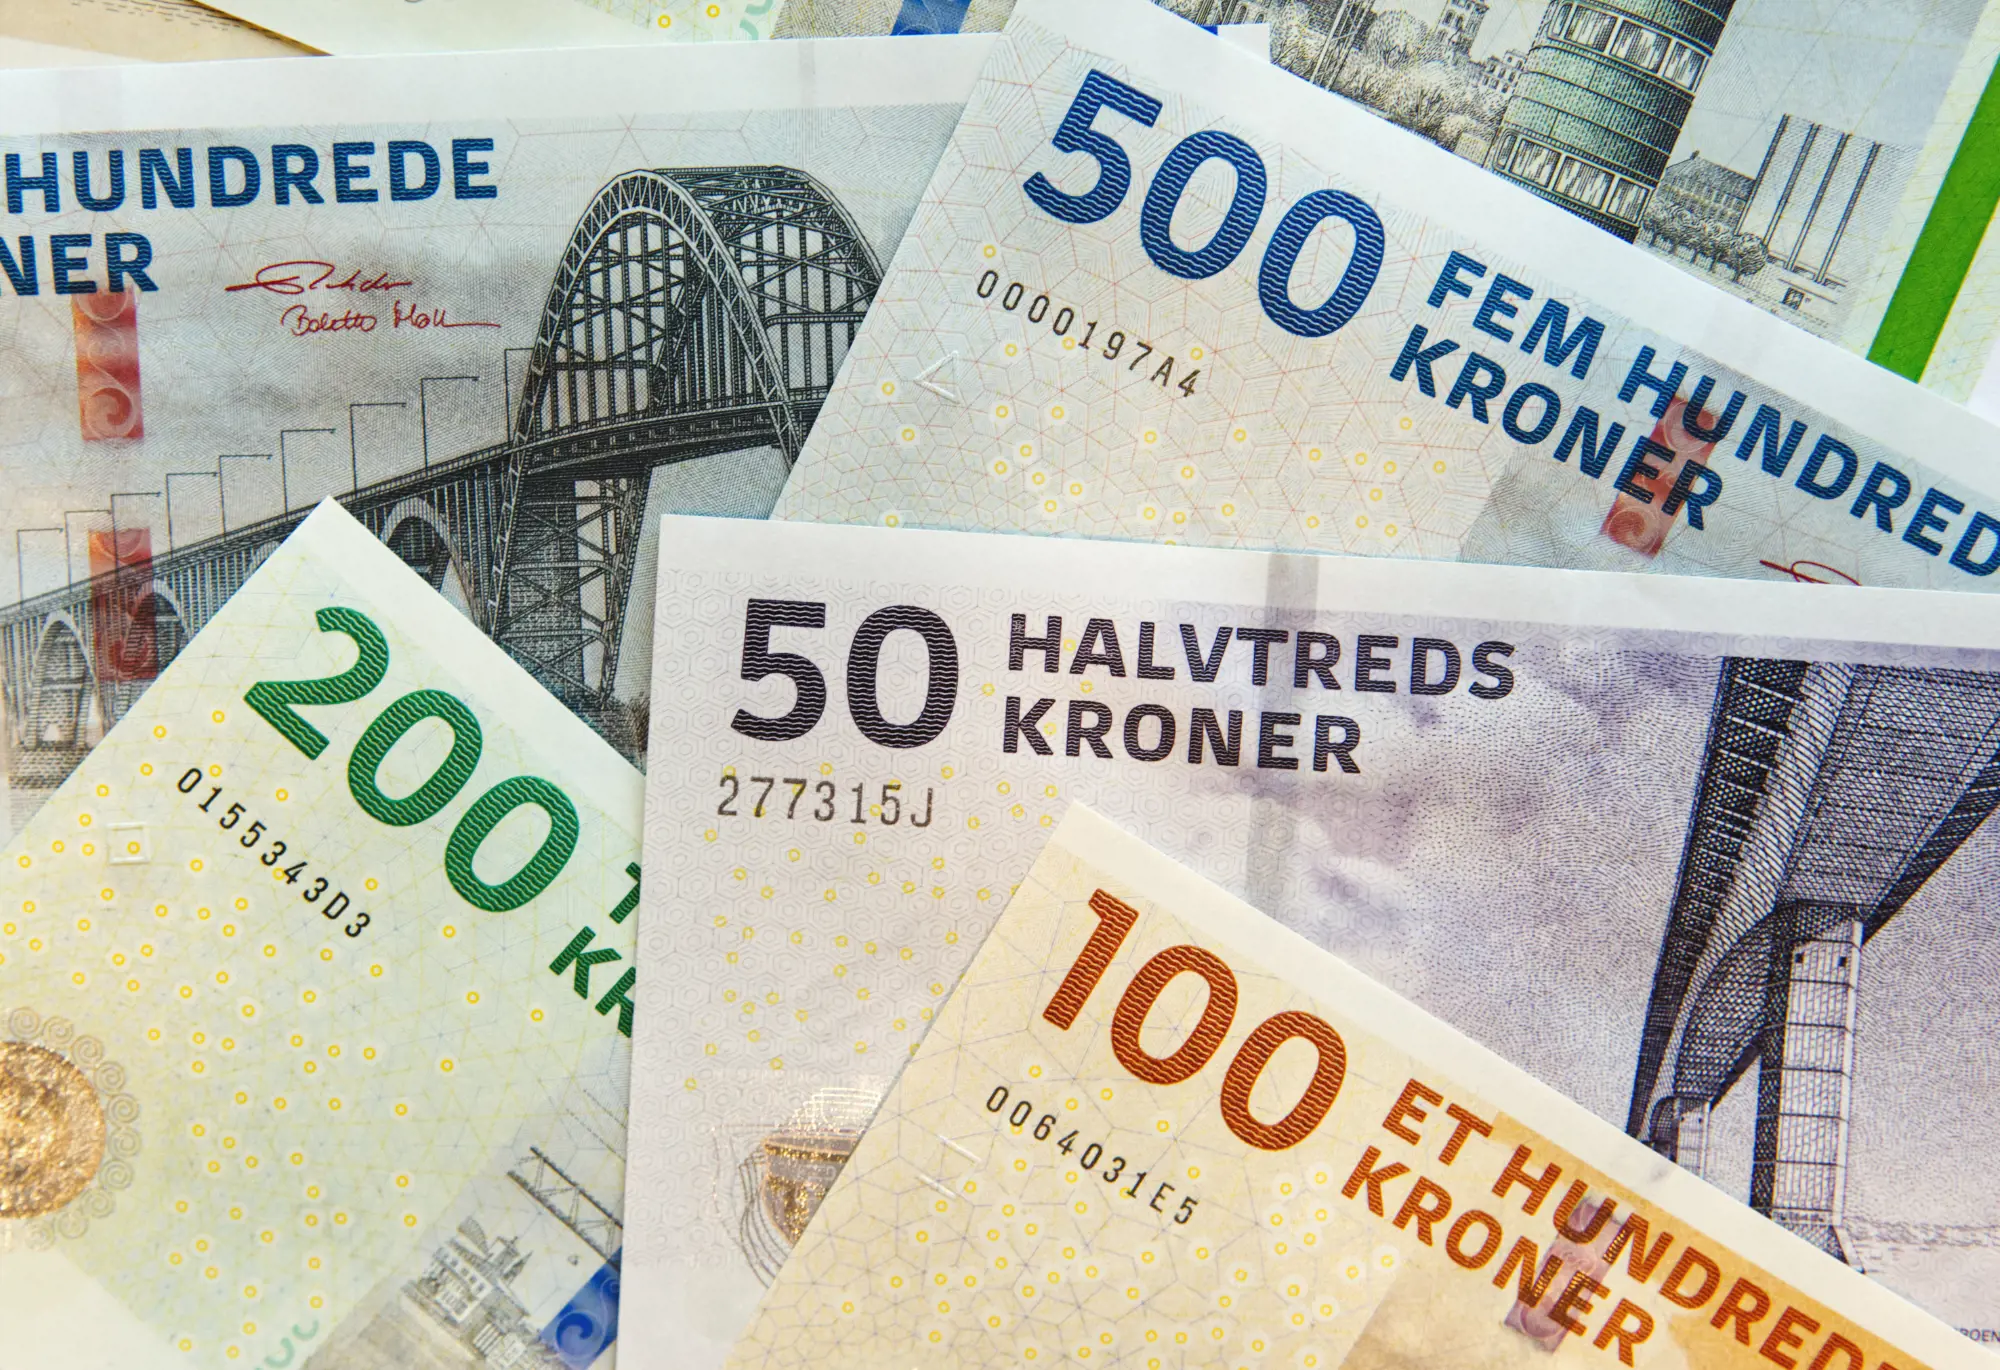 Danish banknotes being redesigned with citizen input